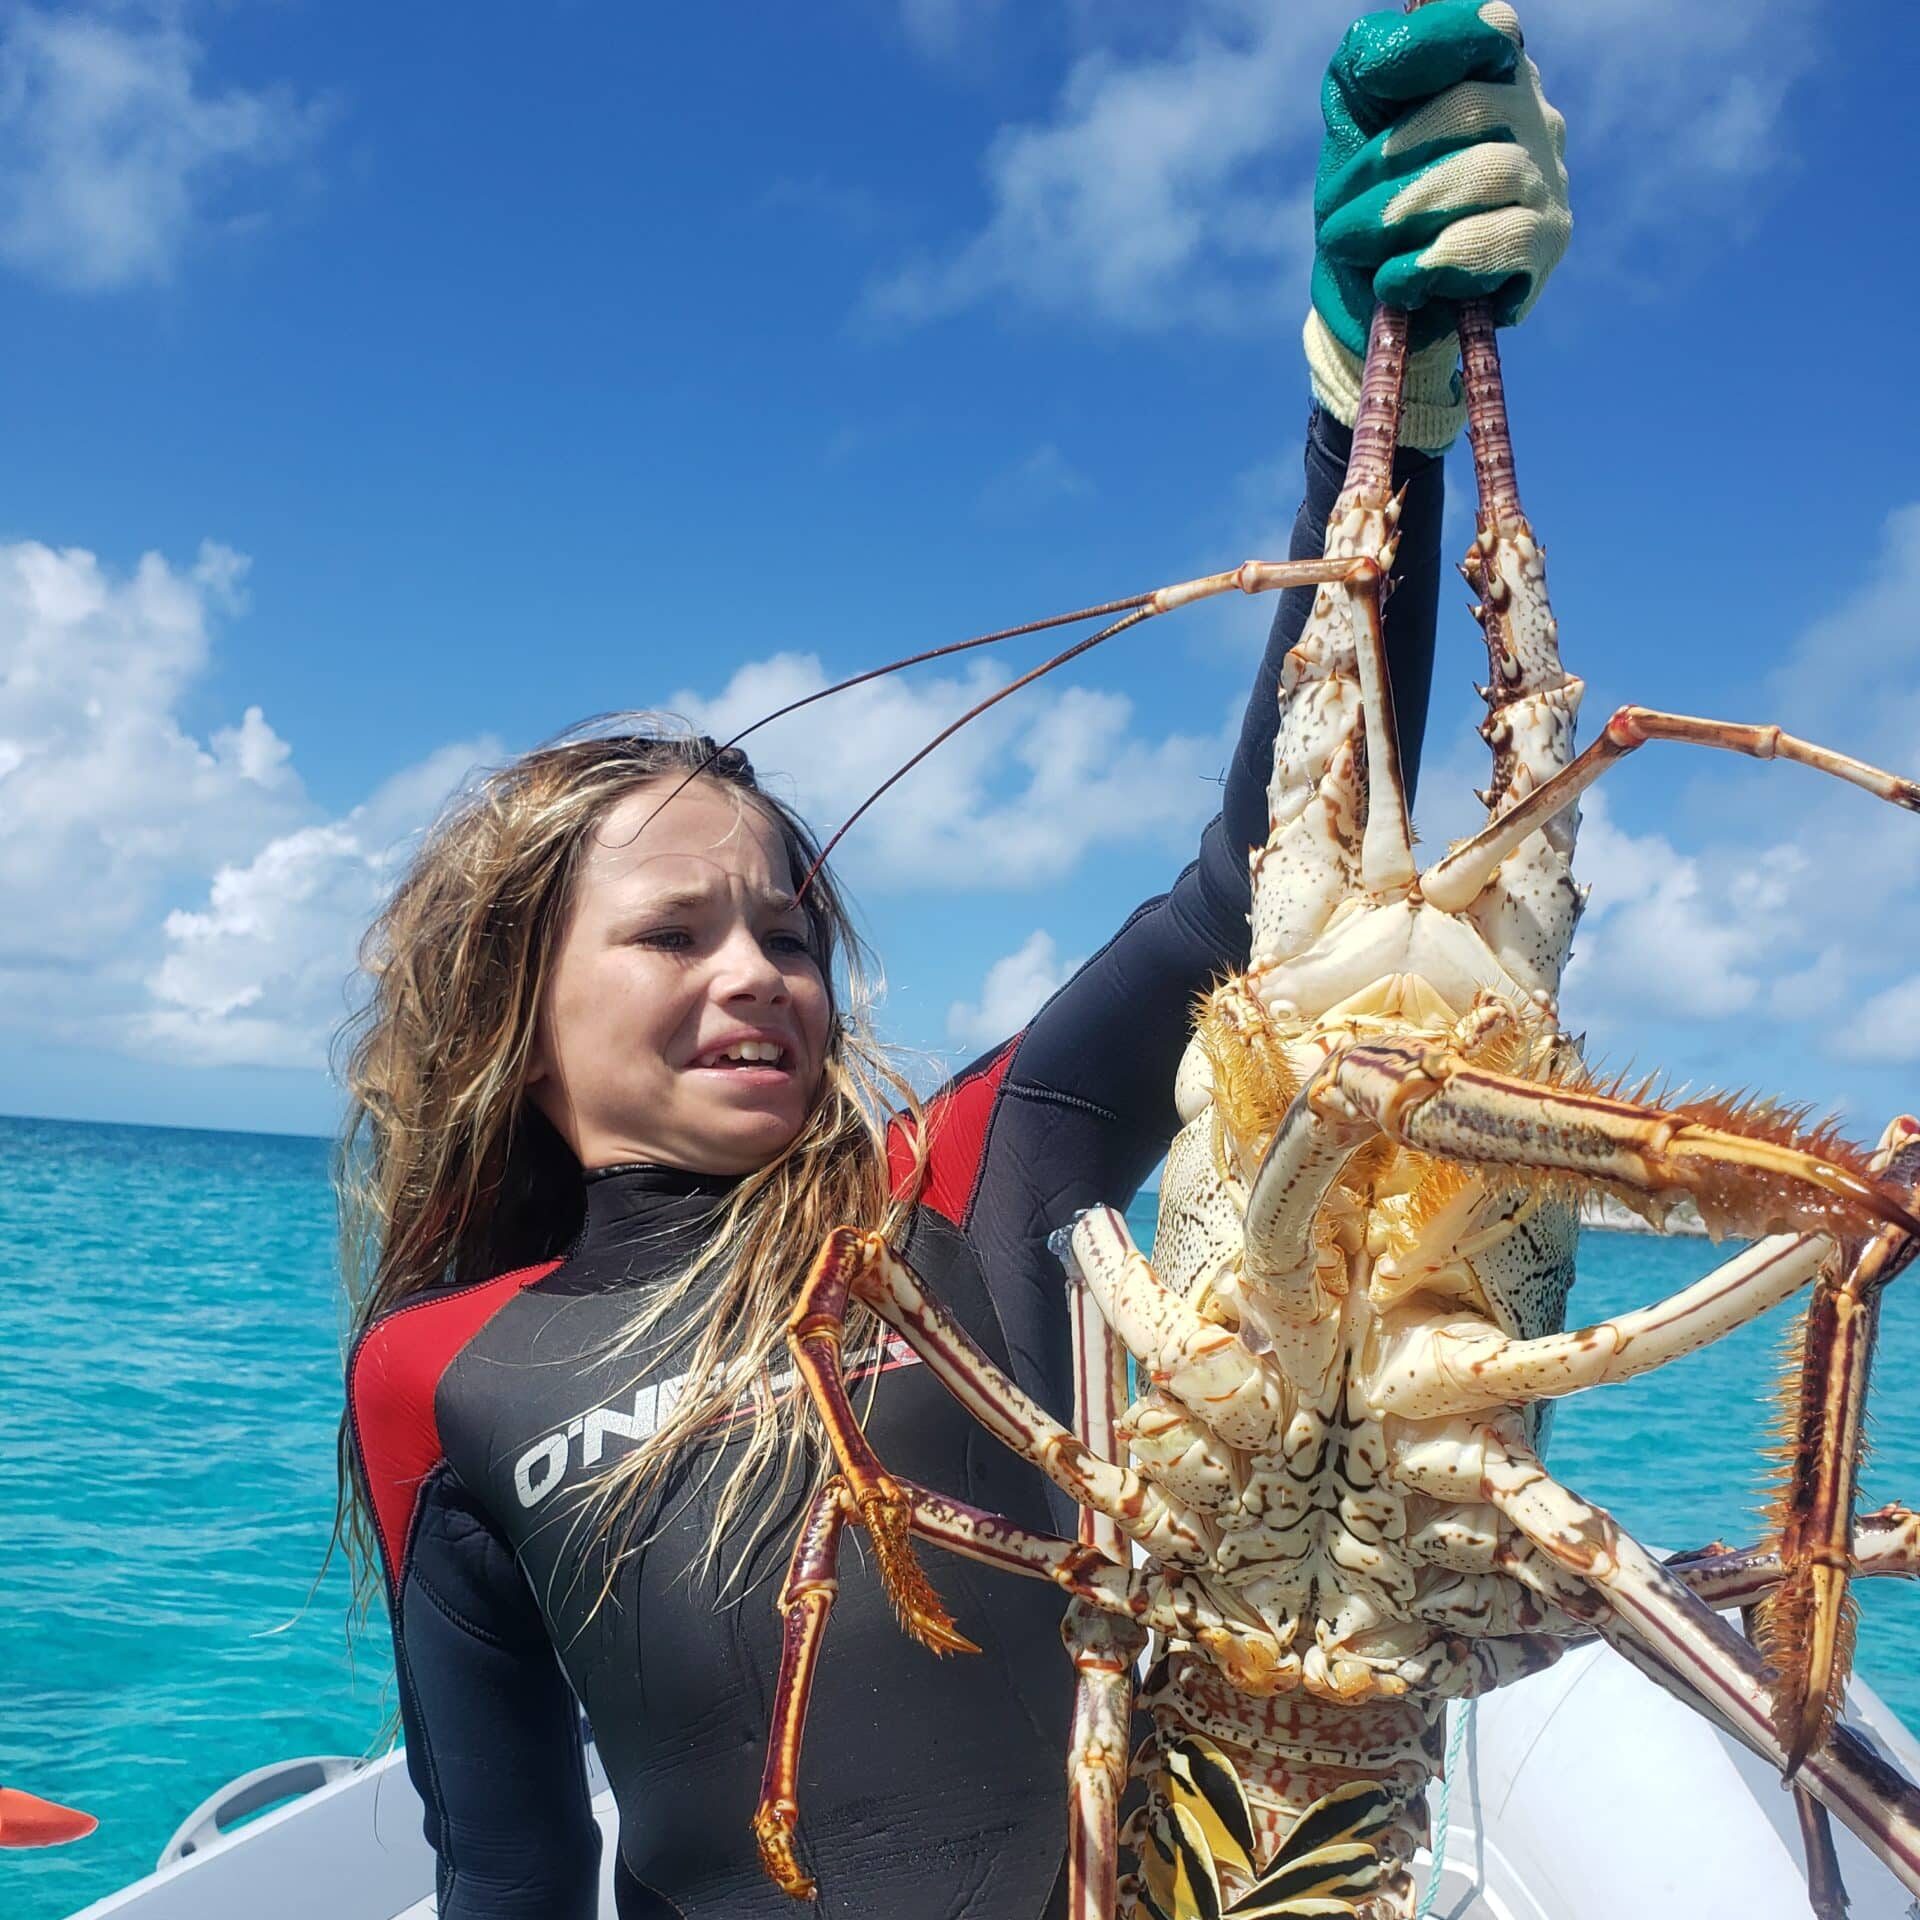 Pippa From Sailing Swift Holding a Massive Lobster